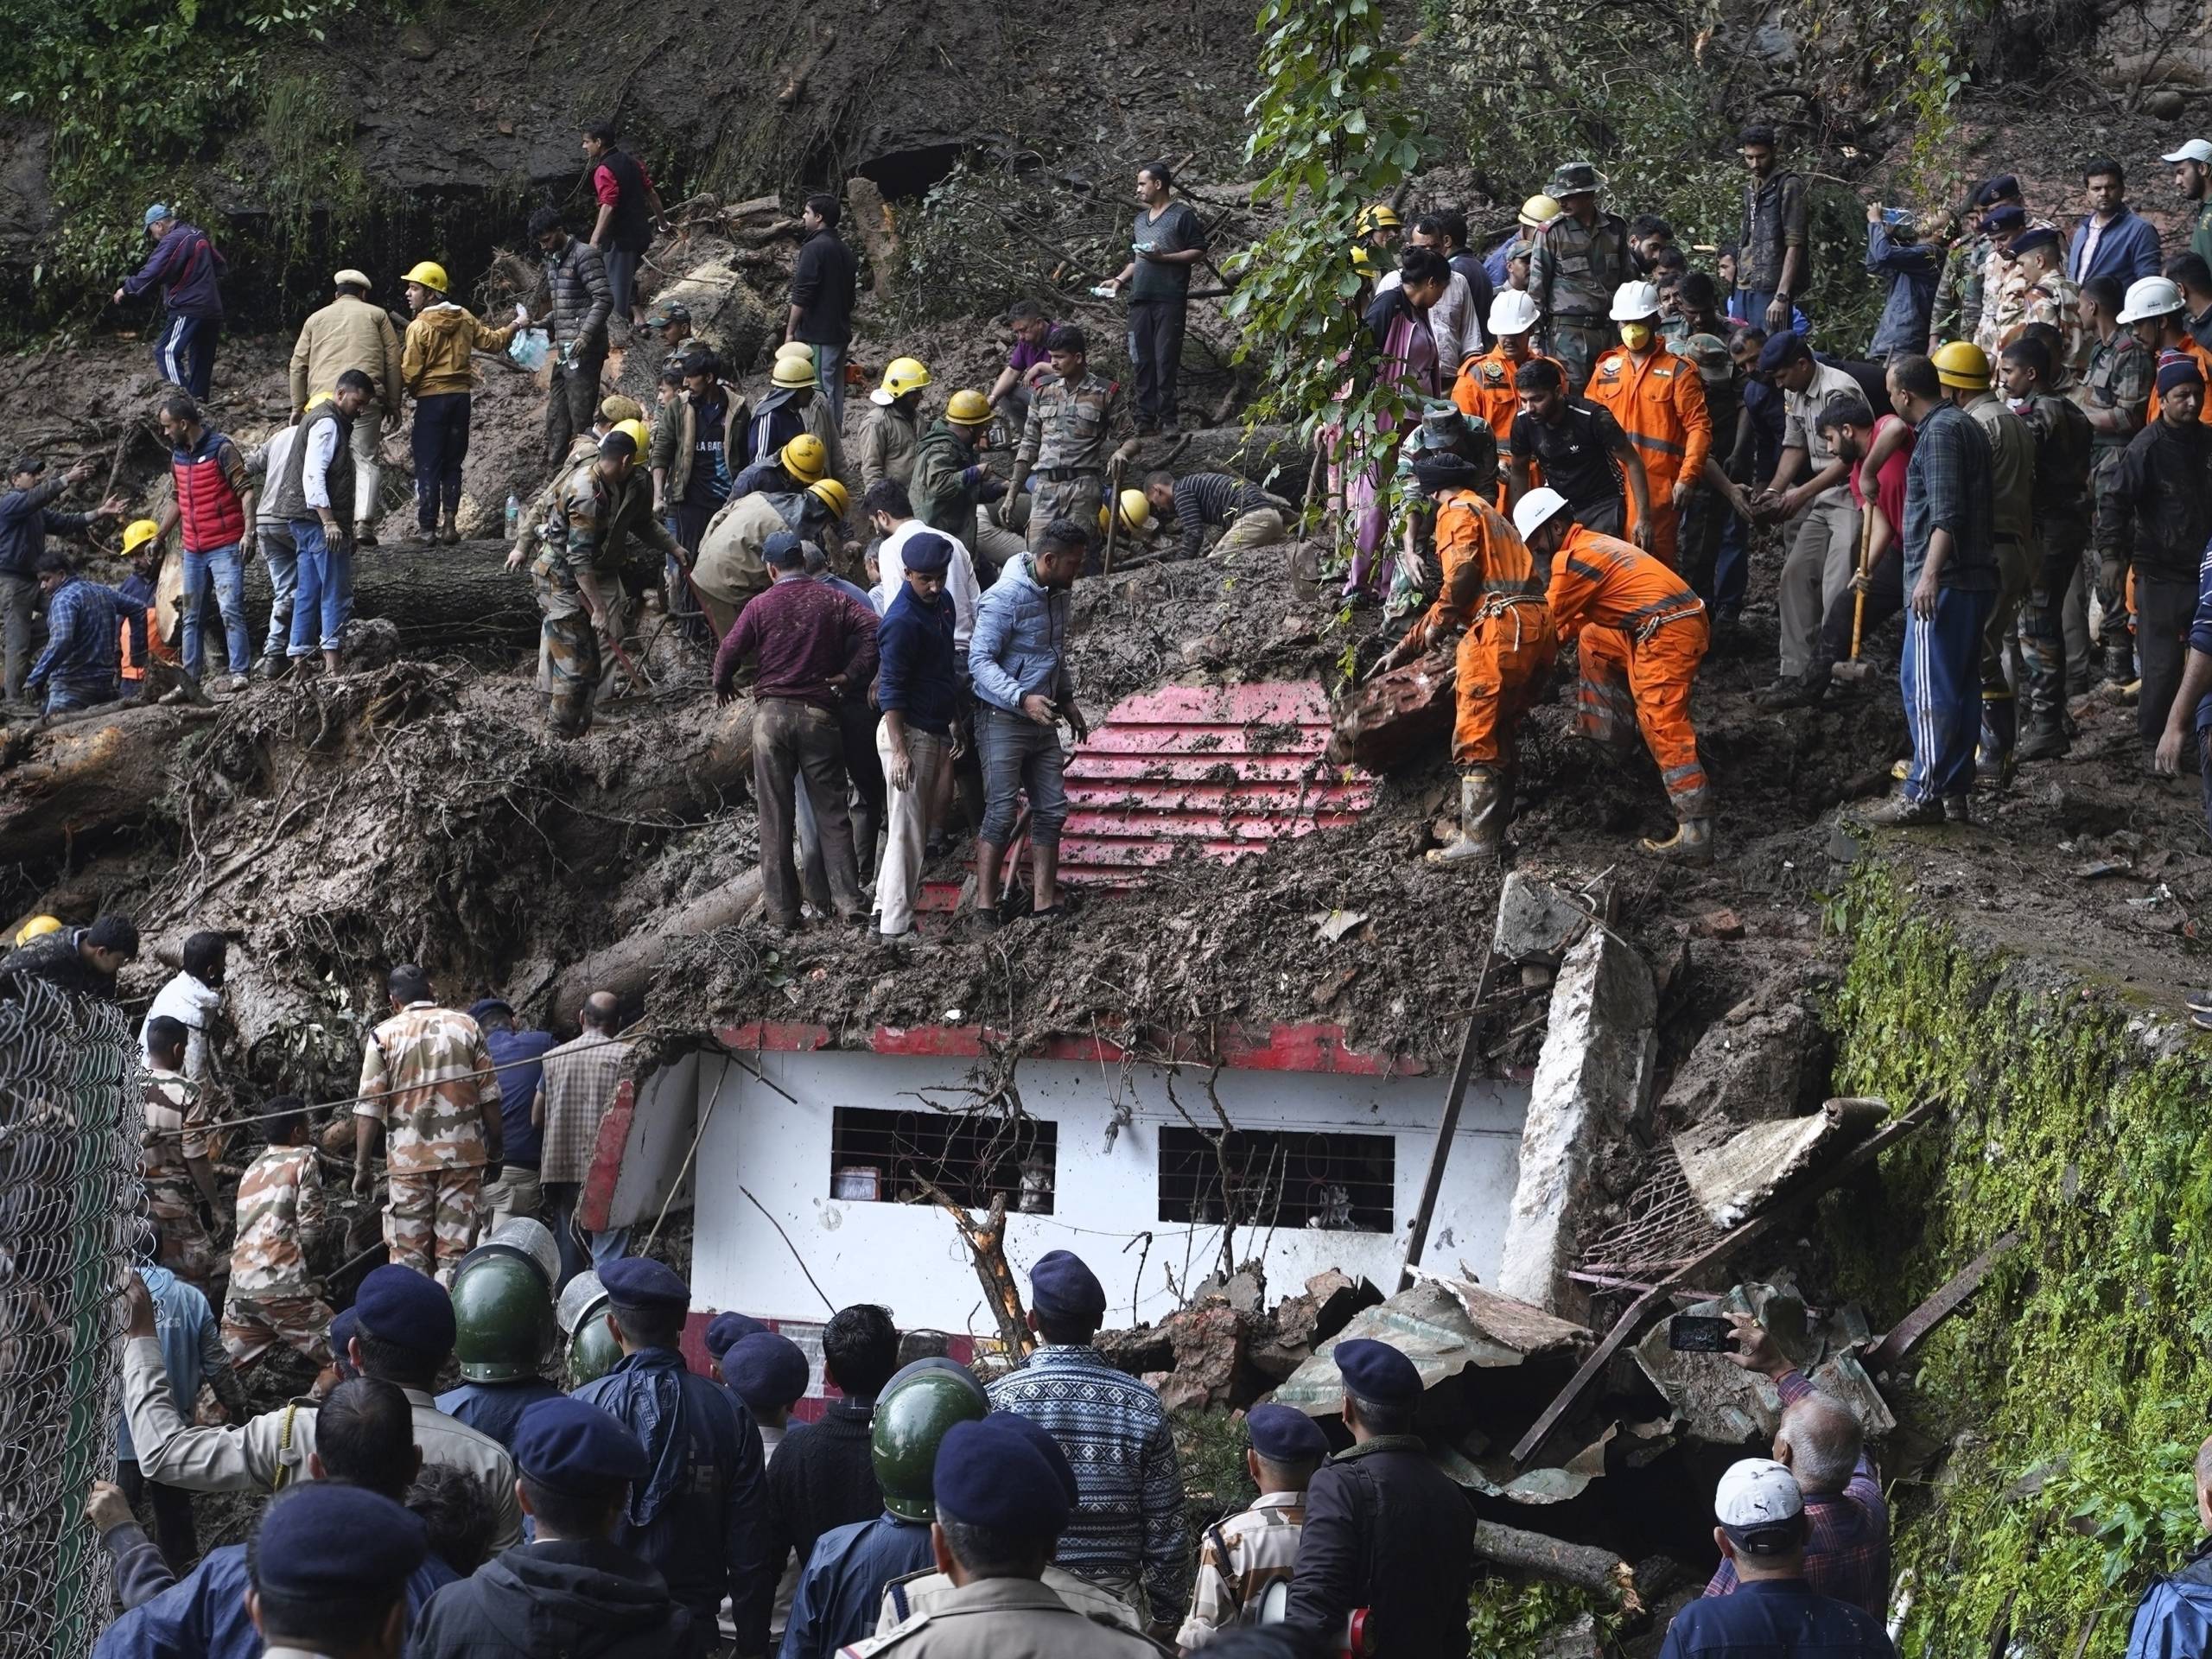 Rescuers remove mud and debris as they search for people feared trapped after a landslide near a temple on the outskirts of Shimla, Himachal Pradesh state, Aug. 14, 2023.